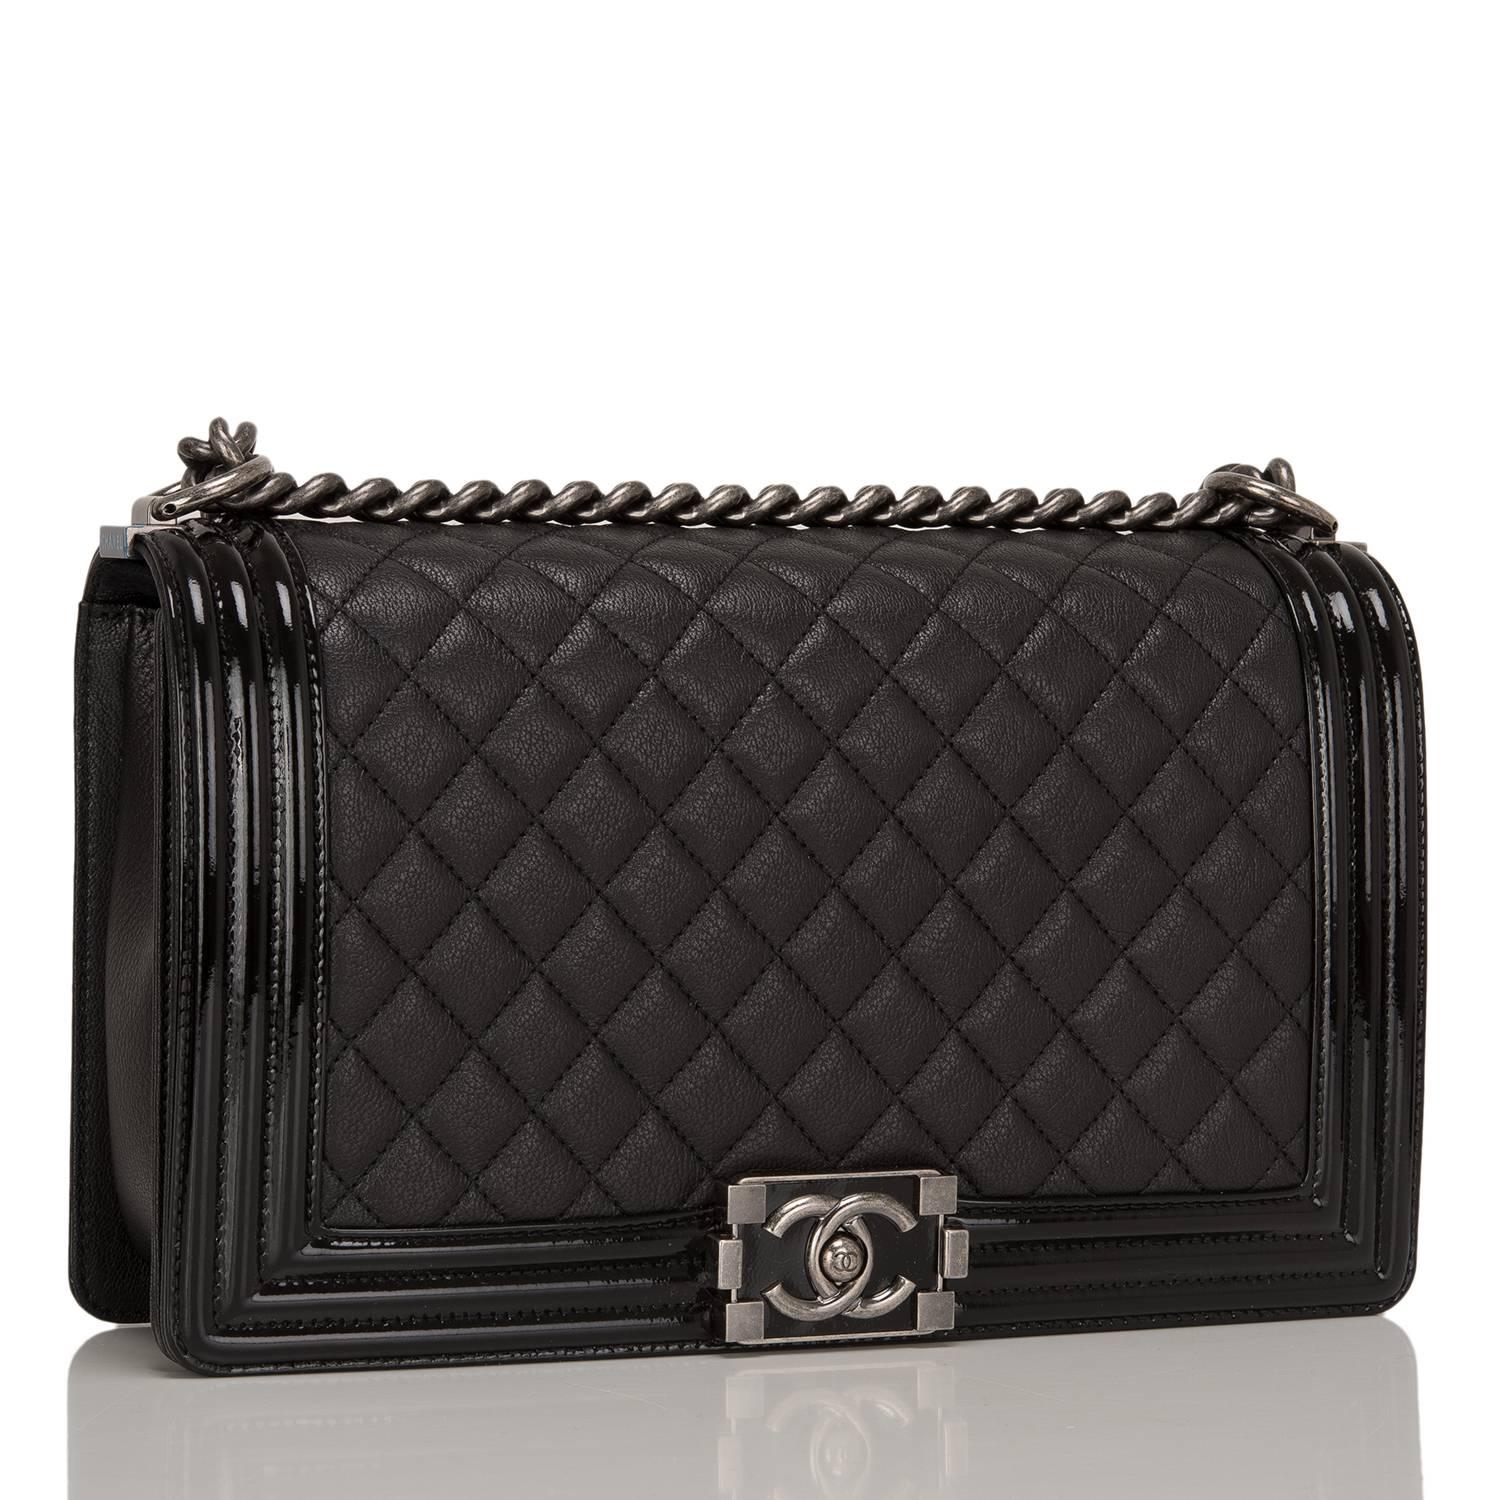 This Chanel New Medium Boy bag is made of black goatskin leather and accented with patent leather trim and aged ruthenium hardware.

The bag features a full front flap with a unique CC logo closure in a glossy lacquer, patent leather trim edging